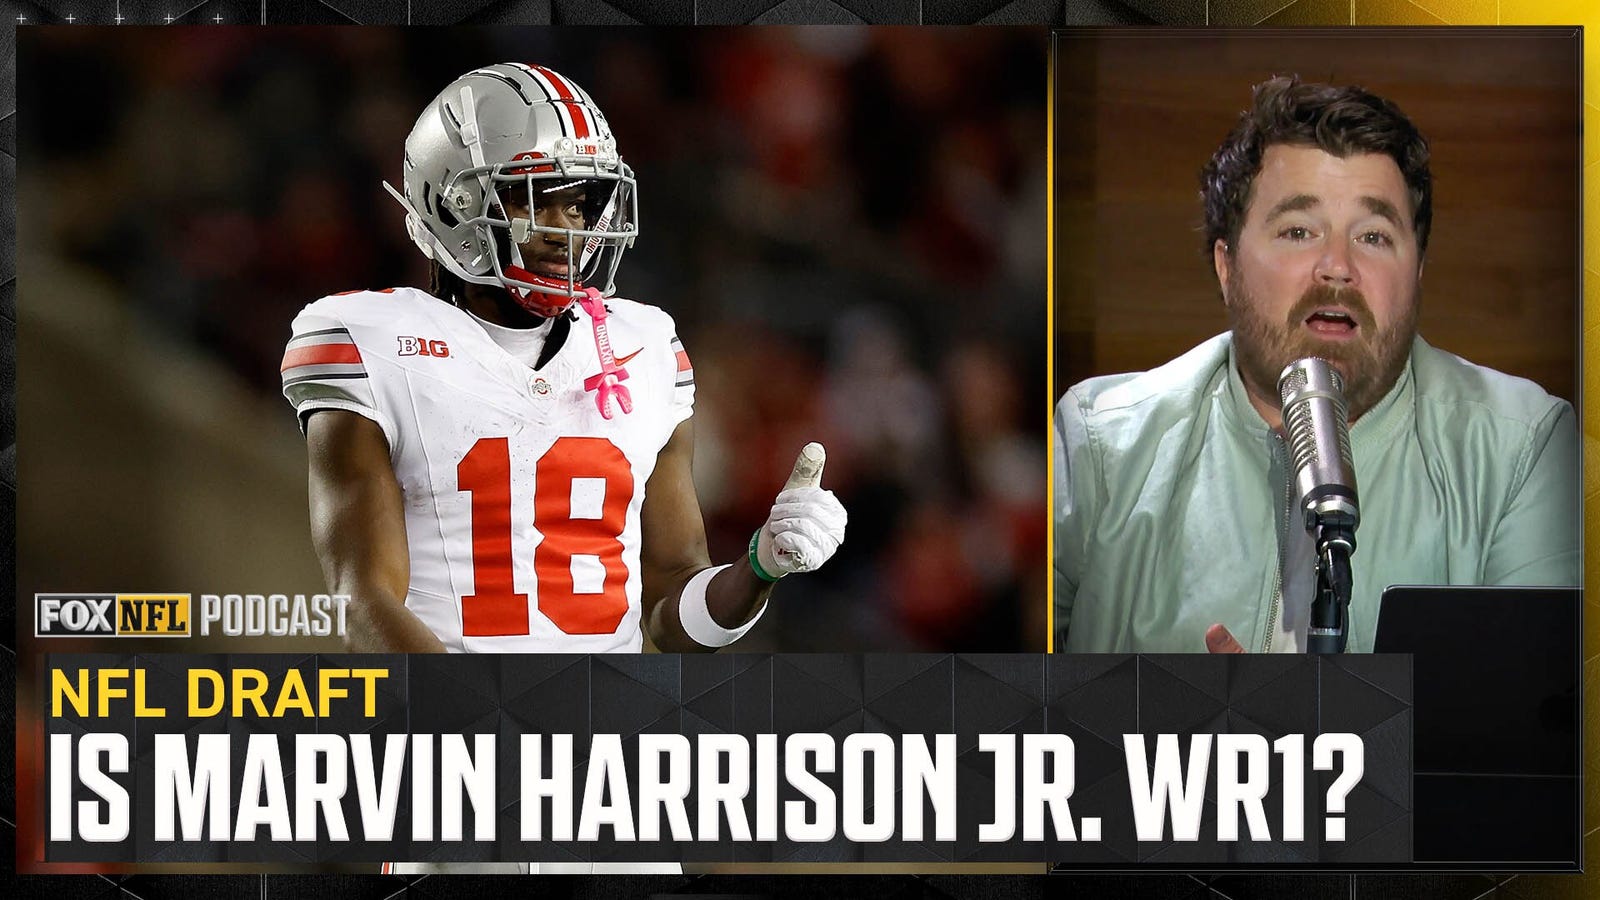 Is Marvin Harrison Jr. truly the best WR in the NFL Draft?